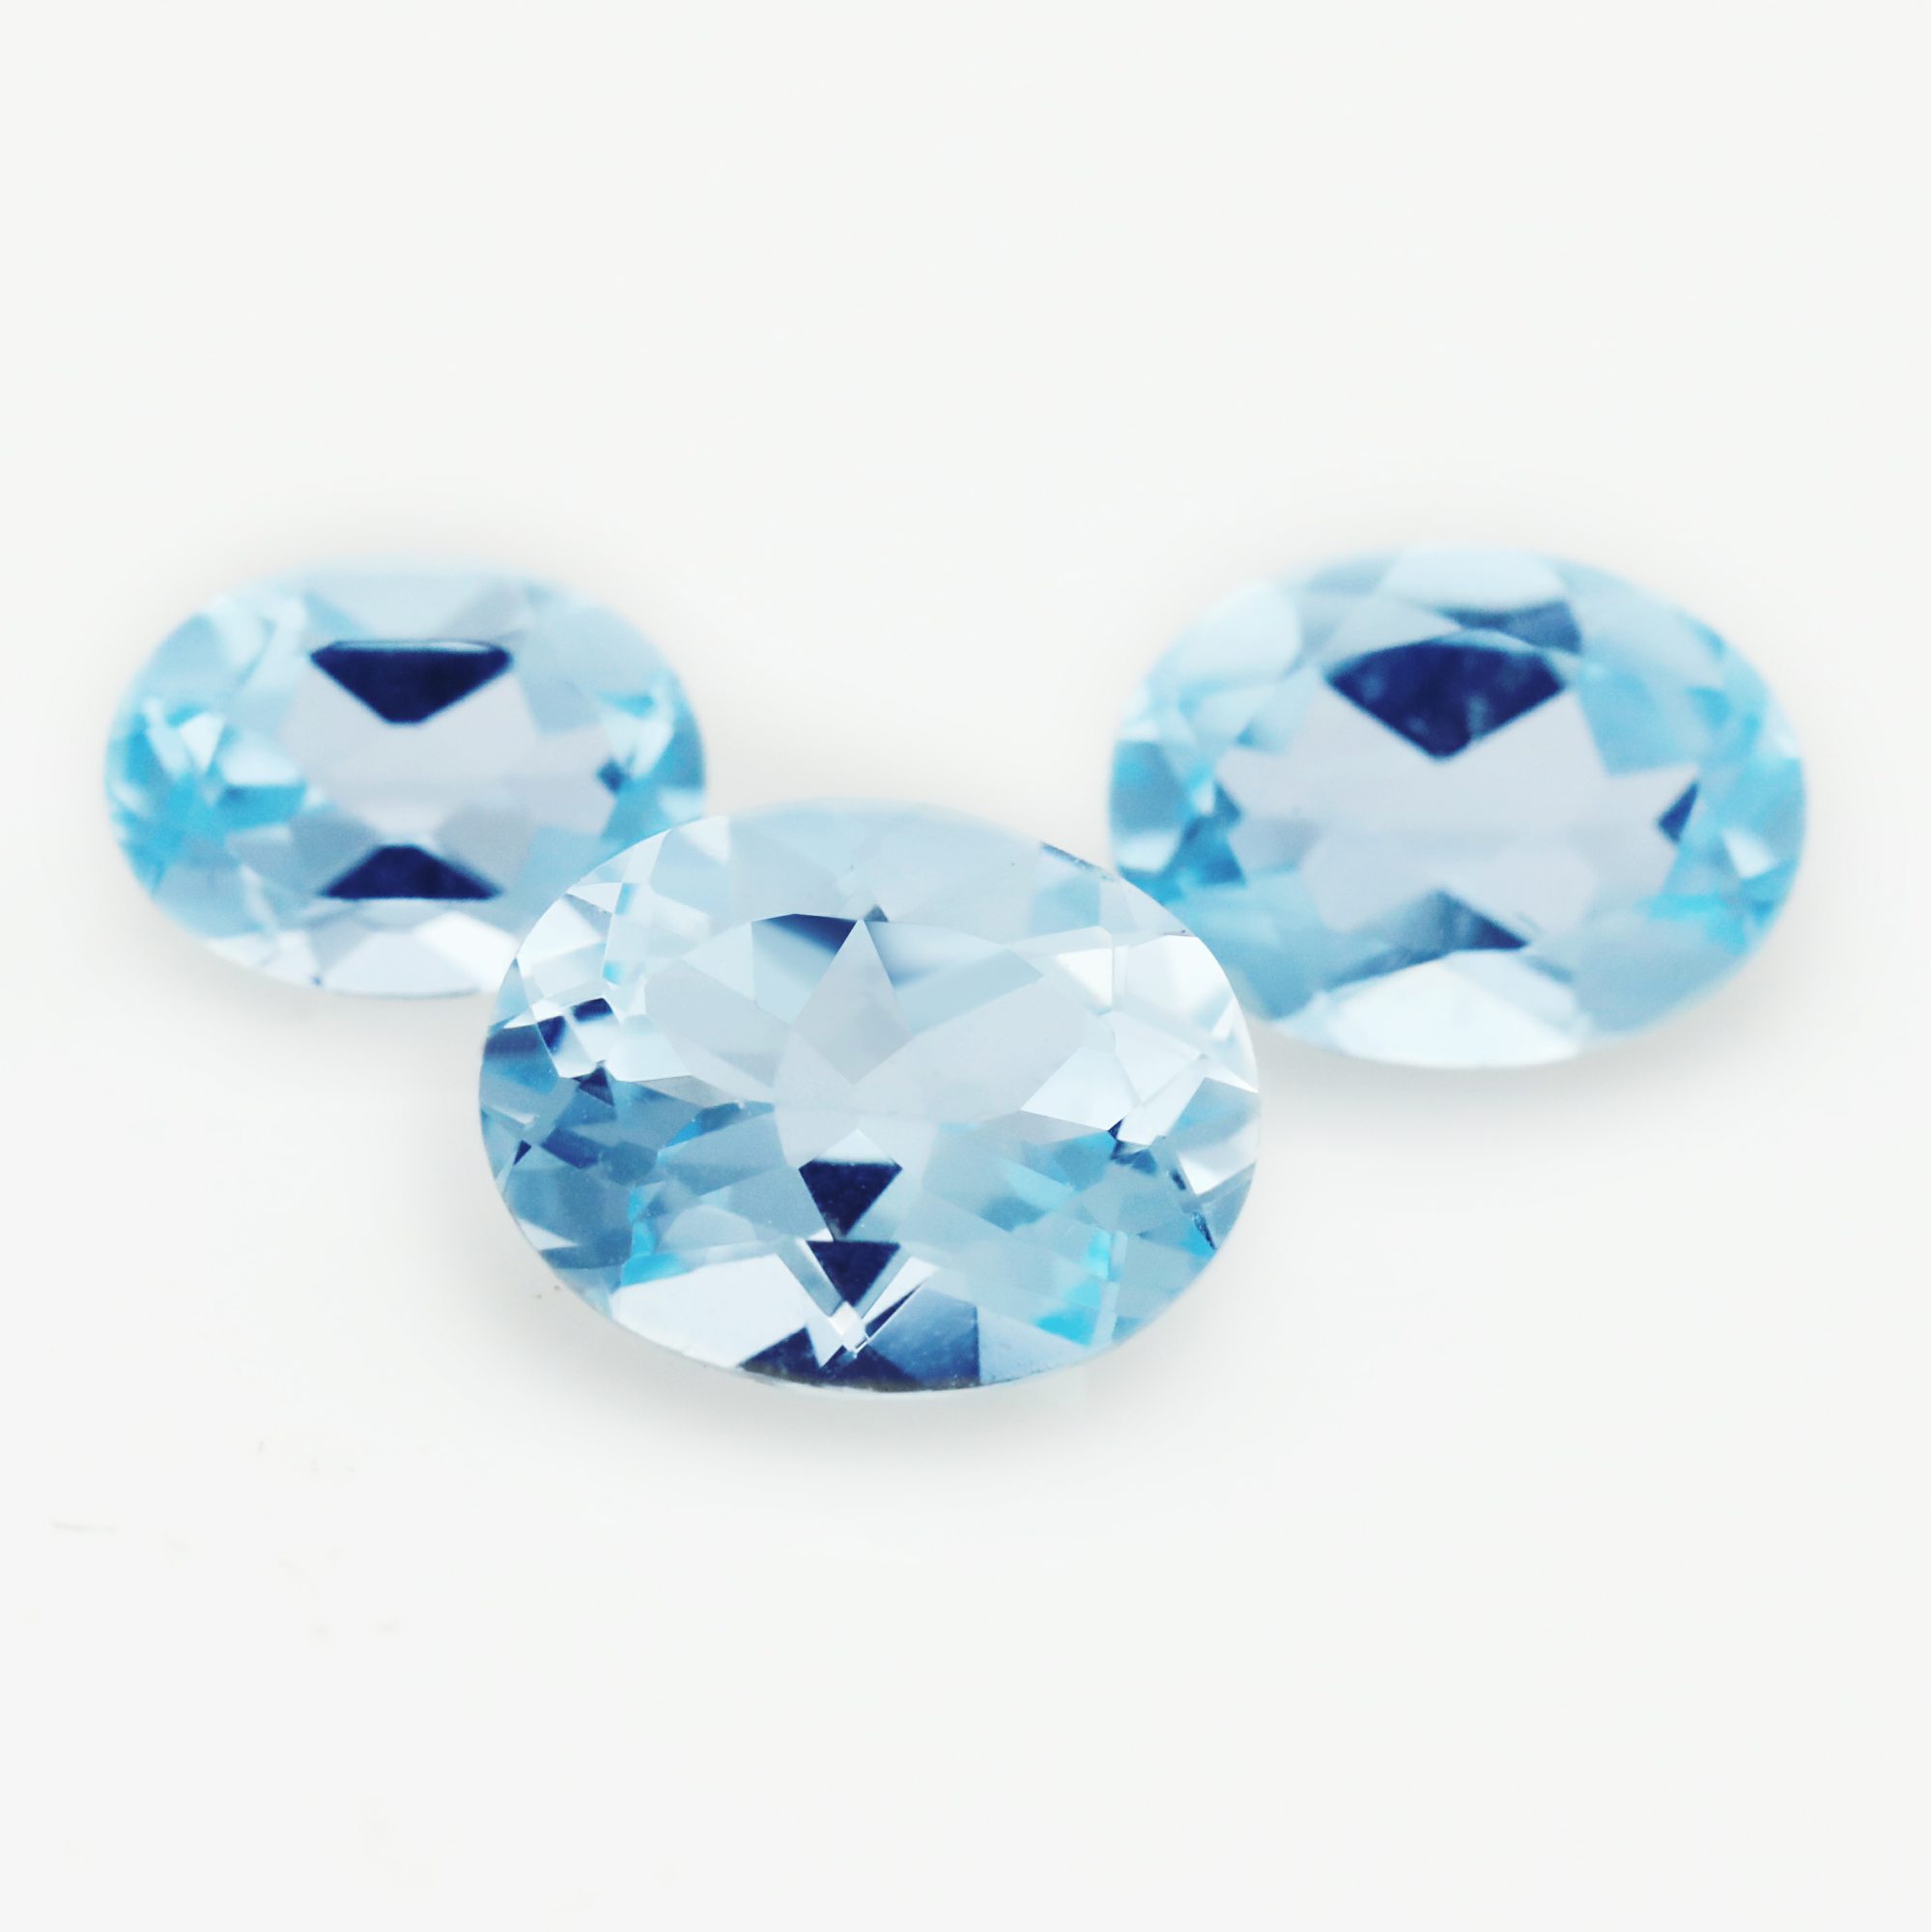 1Pcs Oval Faceted Sky Blue Topaz Nature October Birthstone DIY Loose Gemstone Supplies 4120141 - Click Image to Close